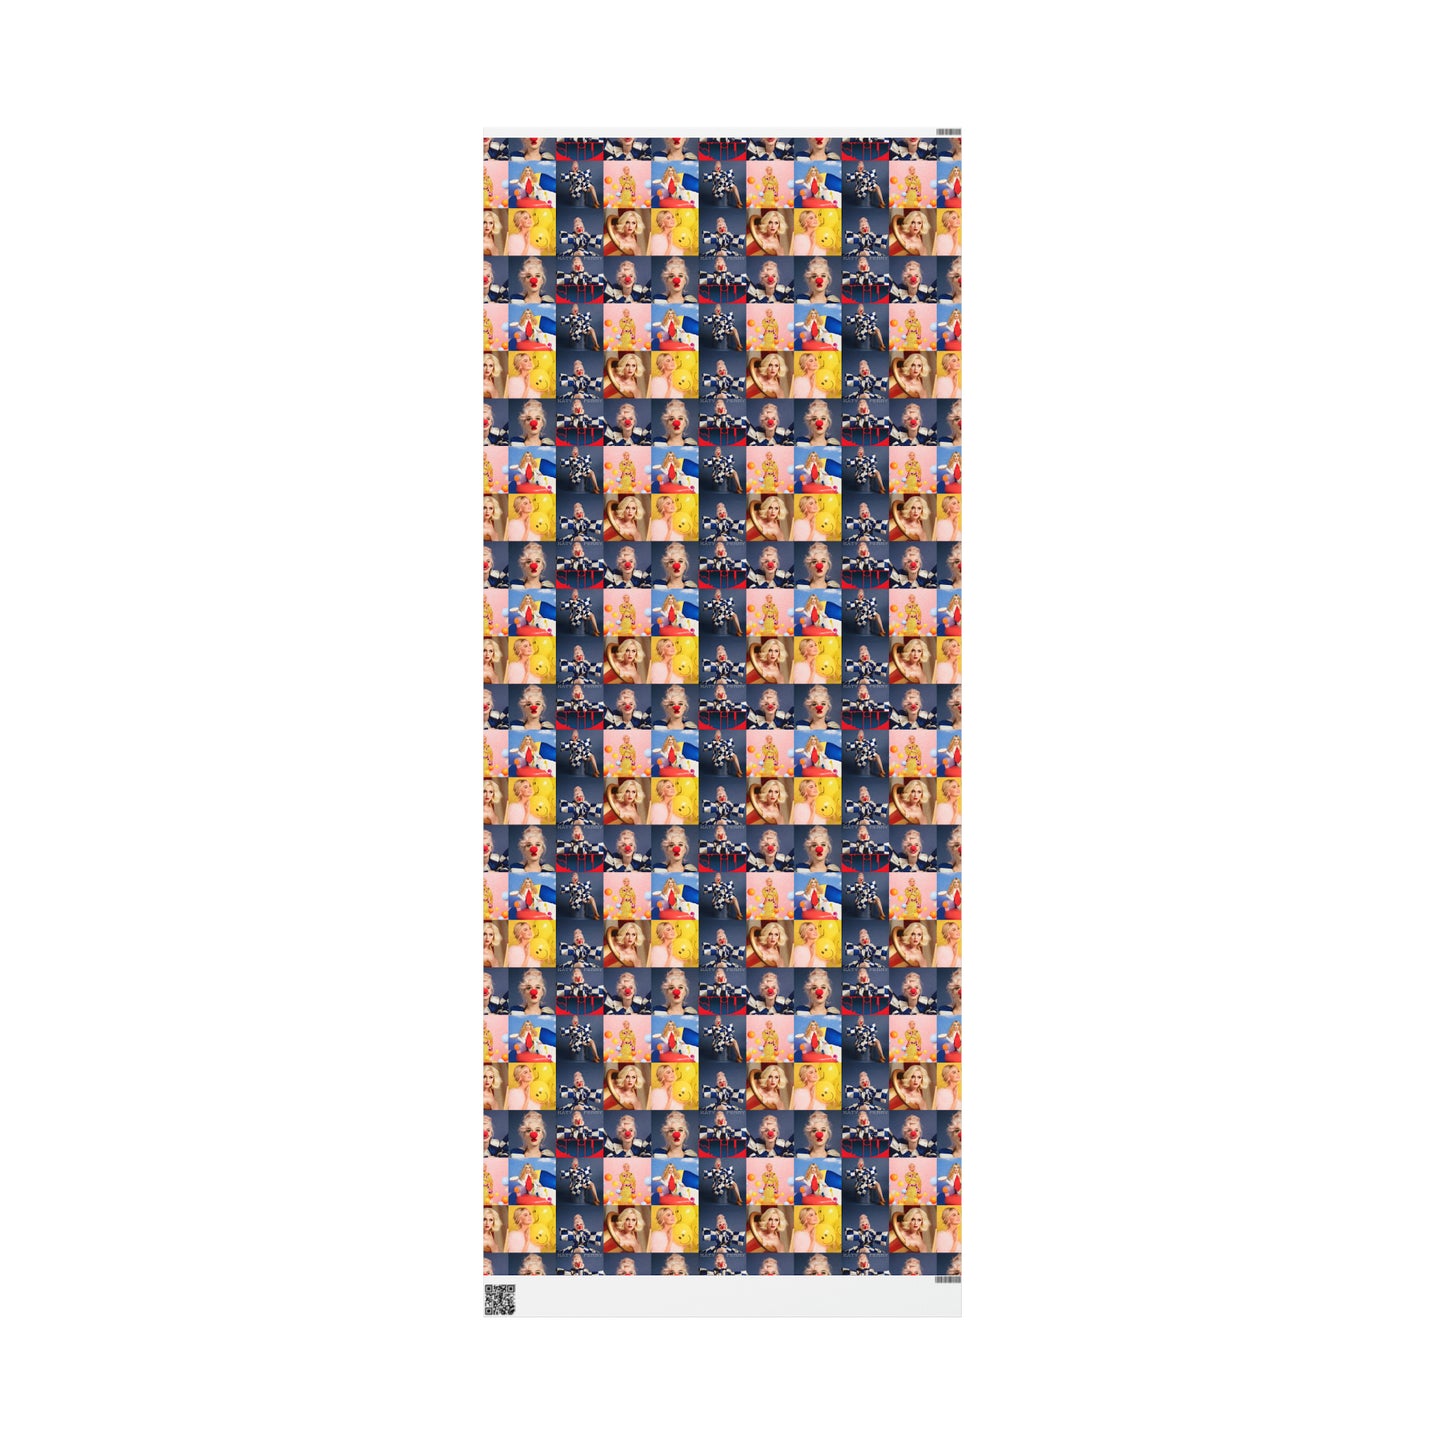 Katy Perry Smile Mosaic Gift Wrapping Paper